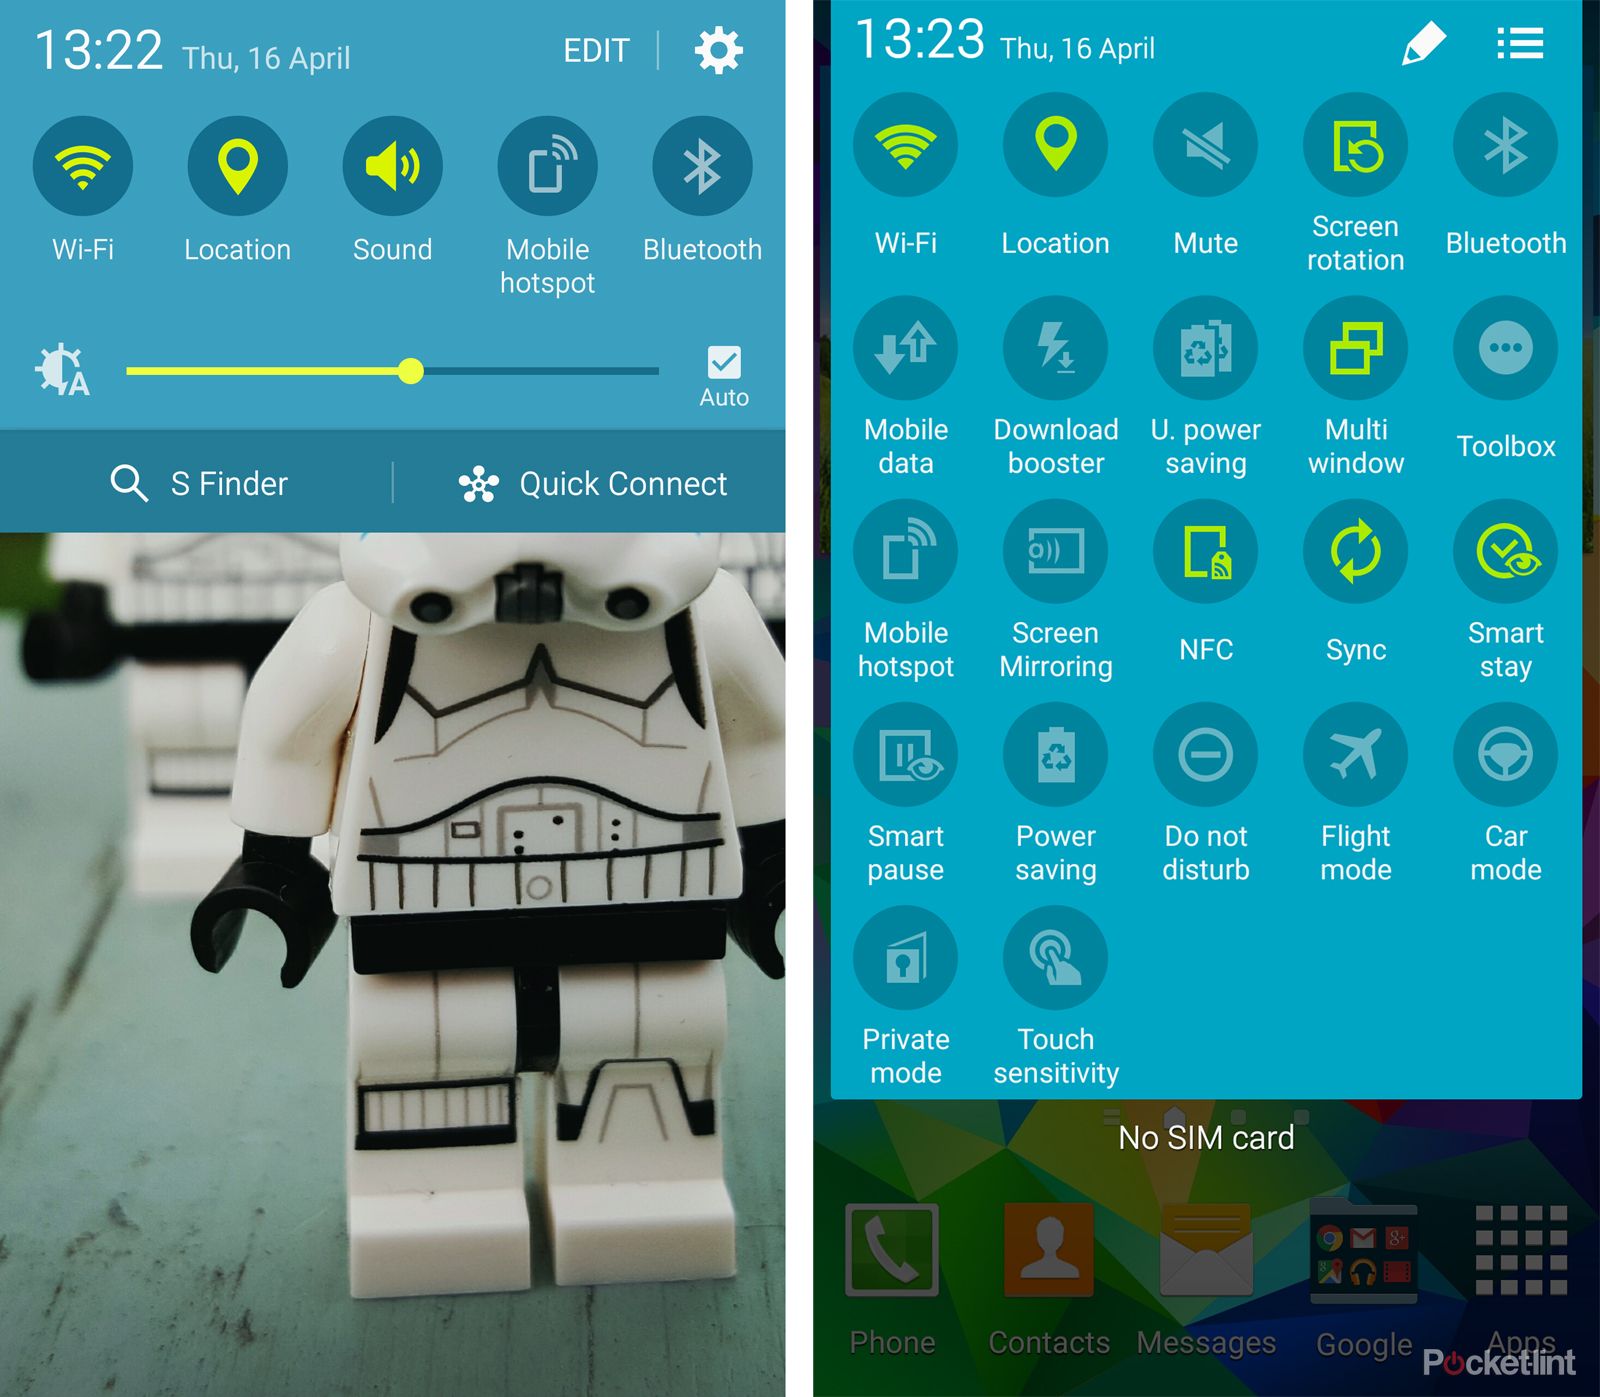 samsung touchwiz review a deep dive into the samsung galaxy s6 software image 6